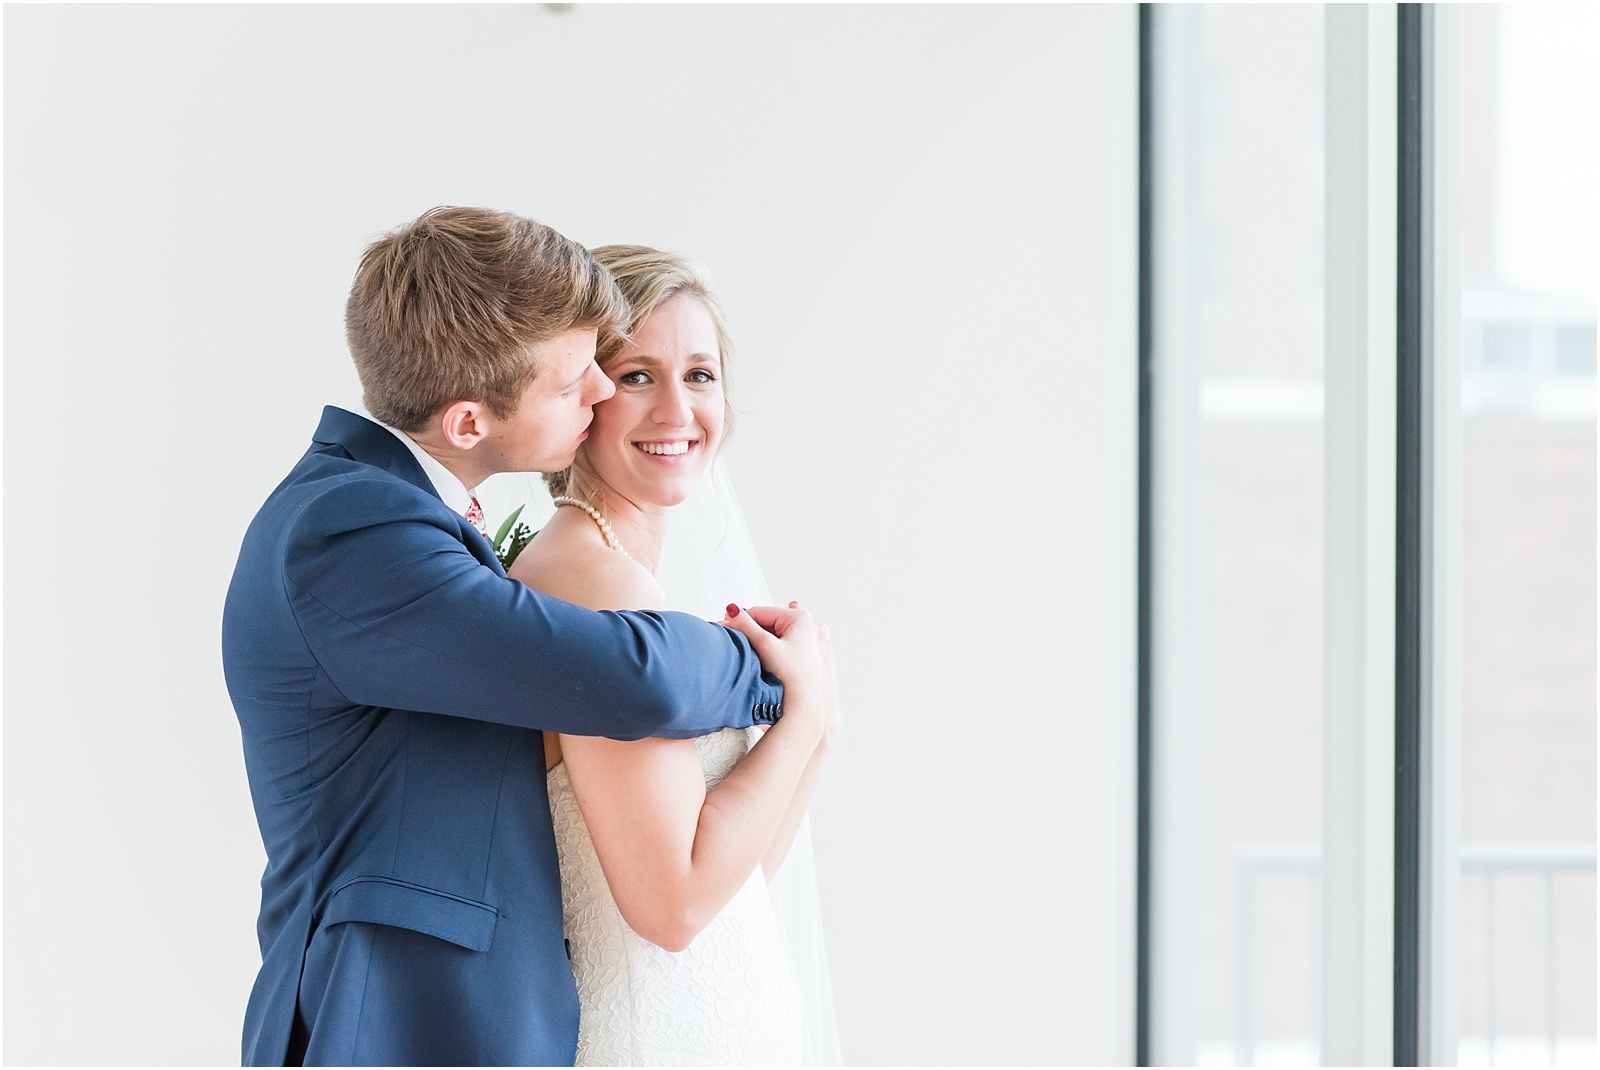 Groom wrapping his arms across his bride and she smiles at the glass box